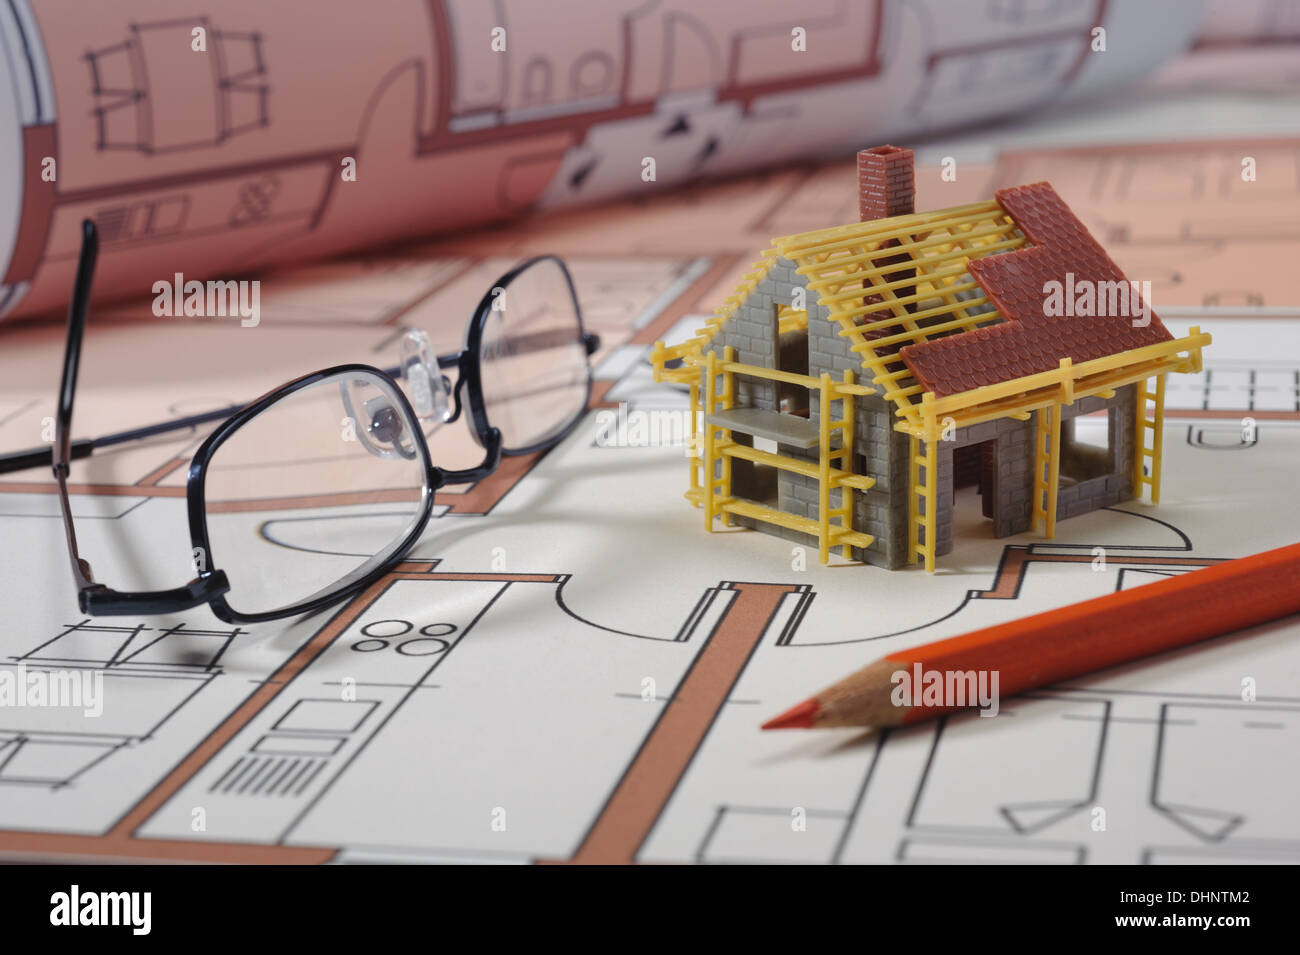 blue print plan for house construction Stock Photo